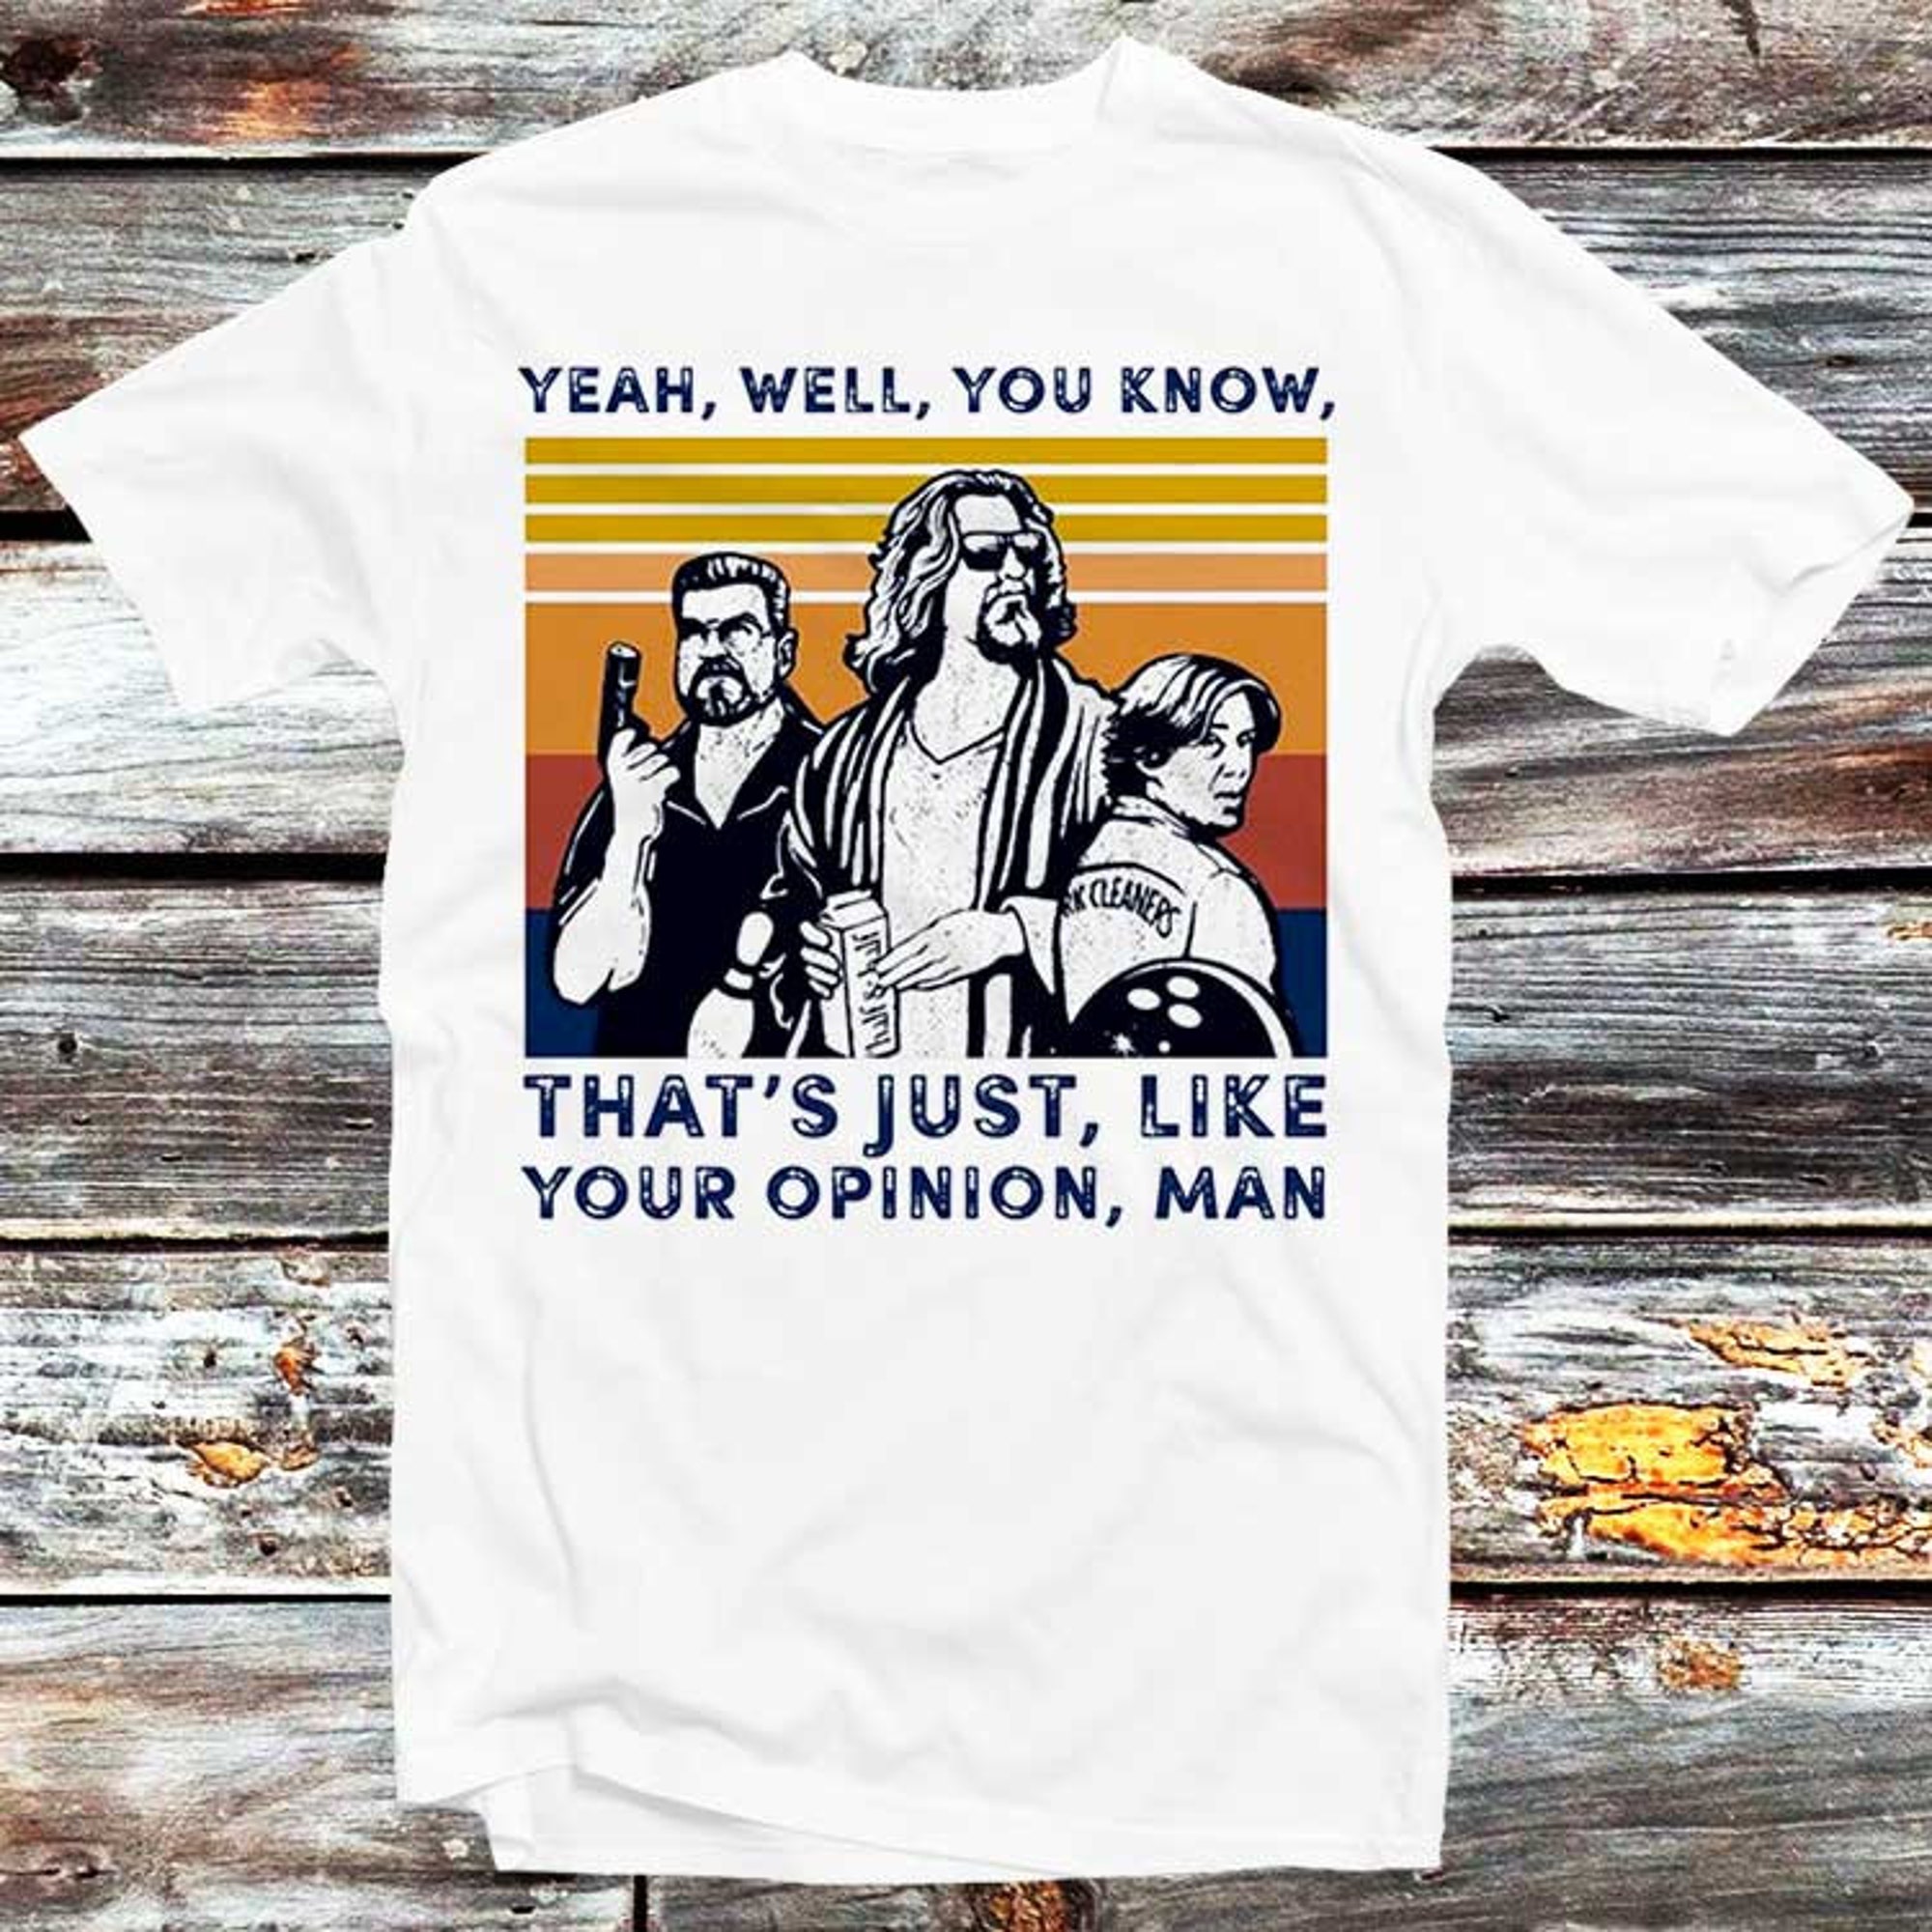 Discover The Dude Your Opinion Man The Big Lebowski T-Shirt